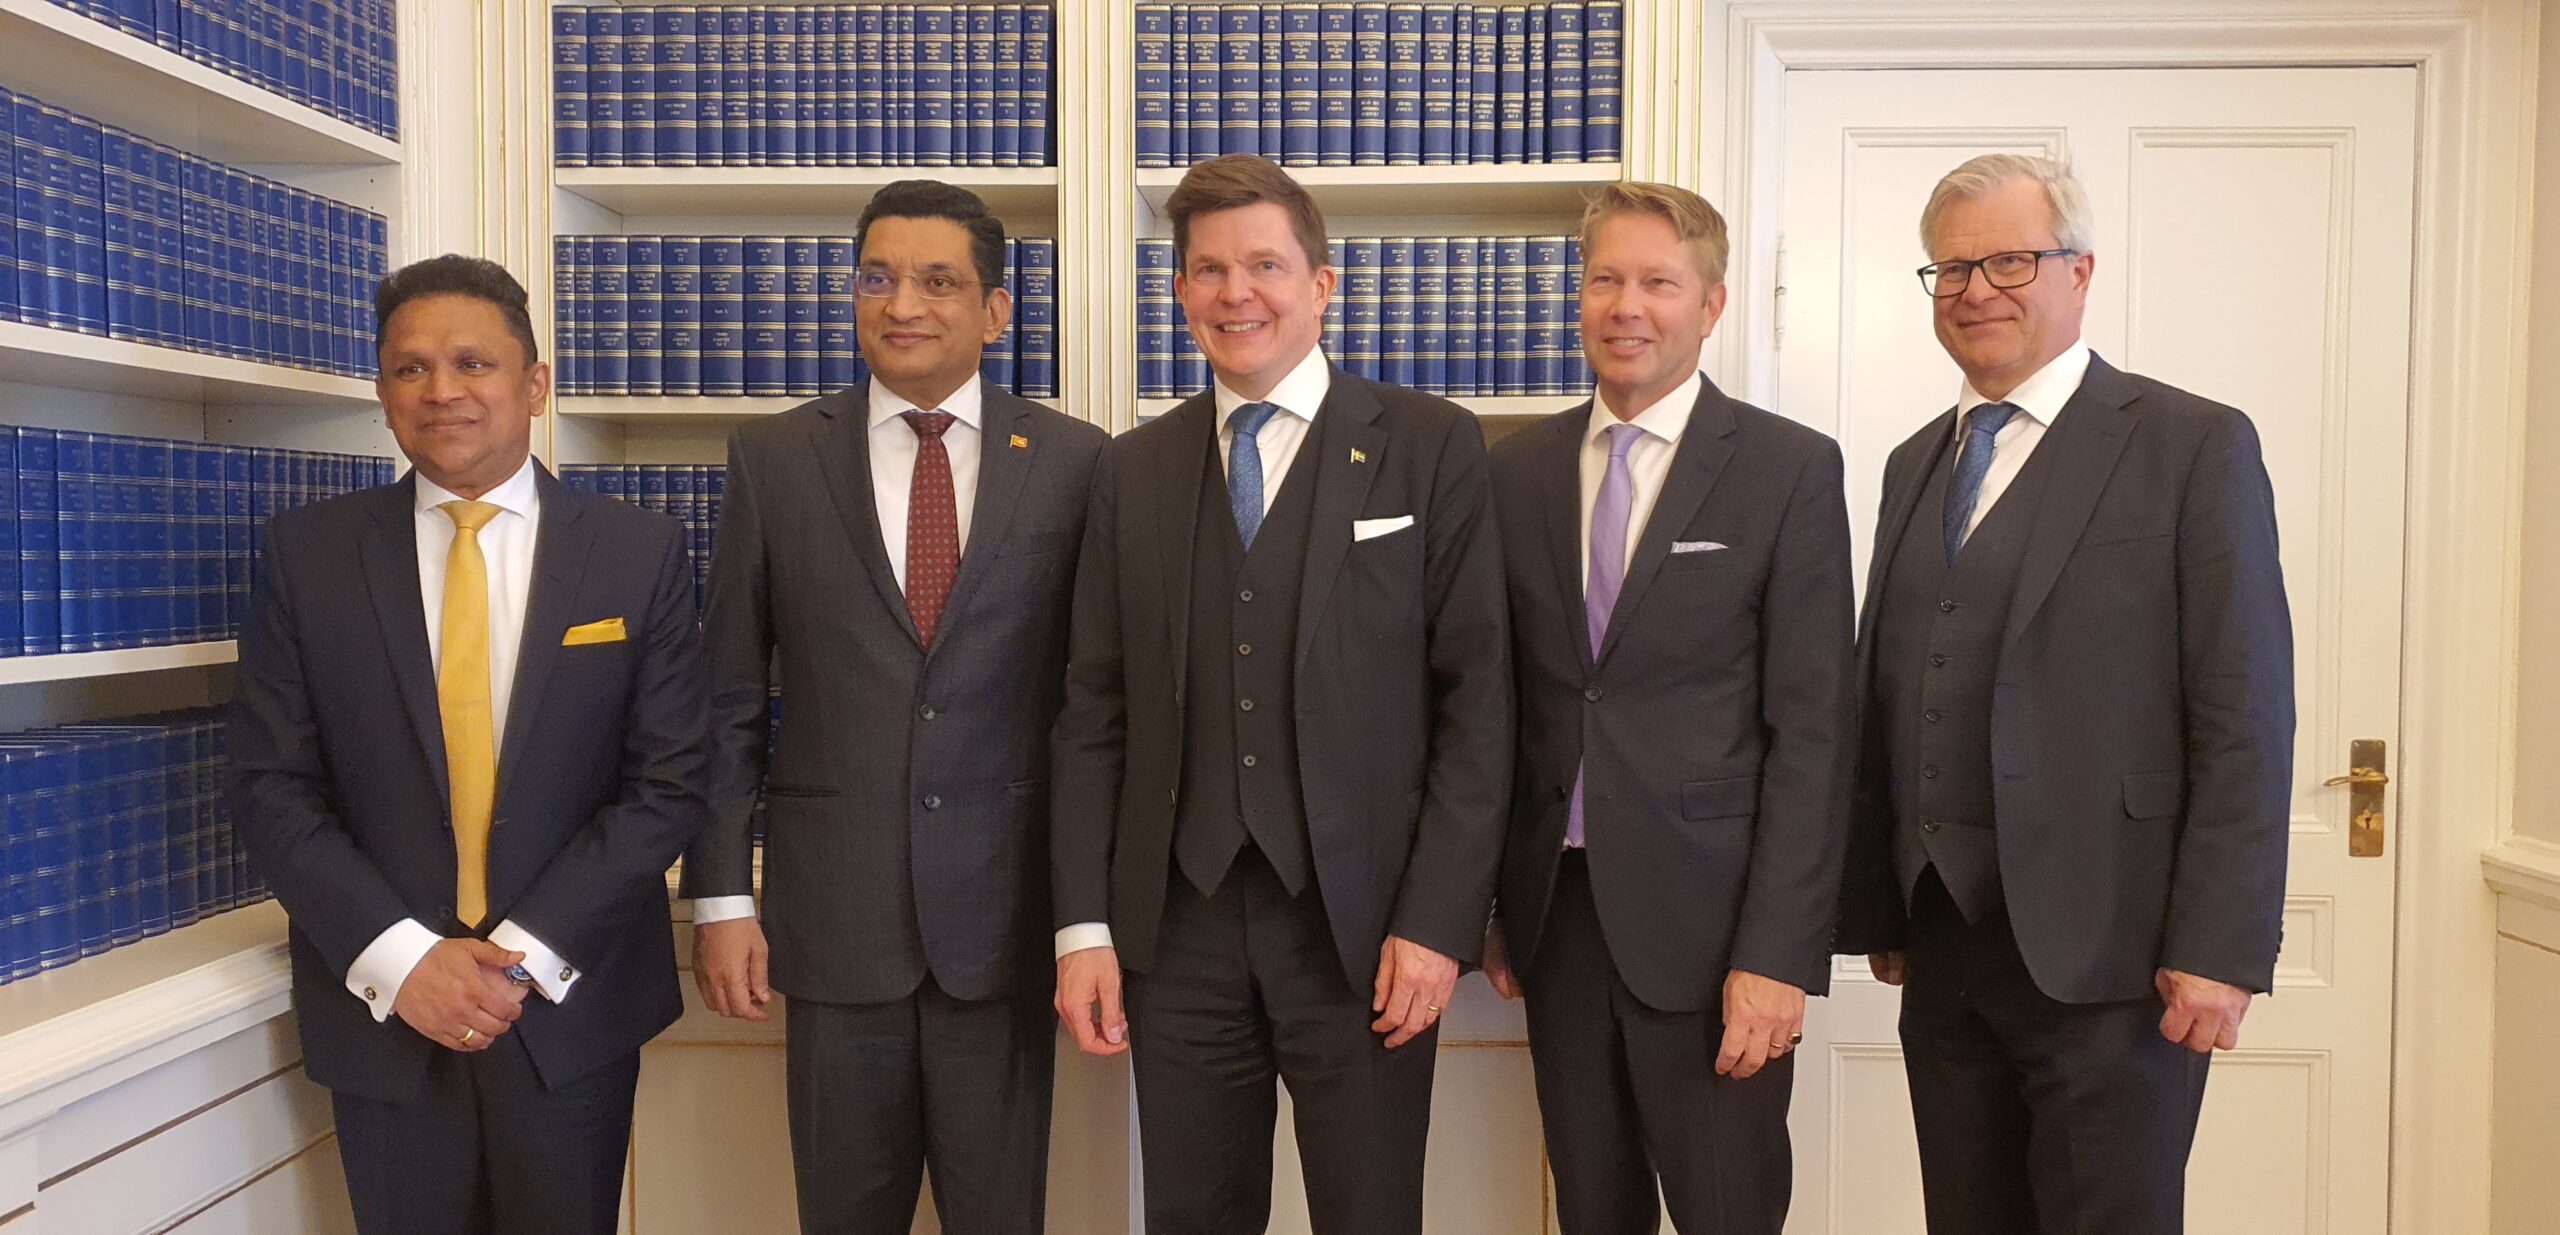 Engagement between the Swedish Riksdag and the Parliament of Sri Lanka to be invigorated